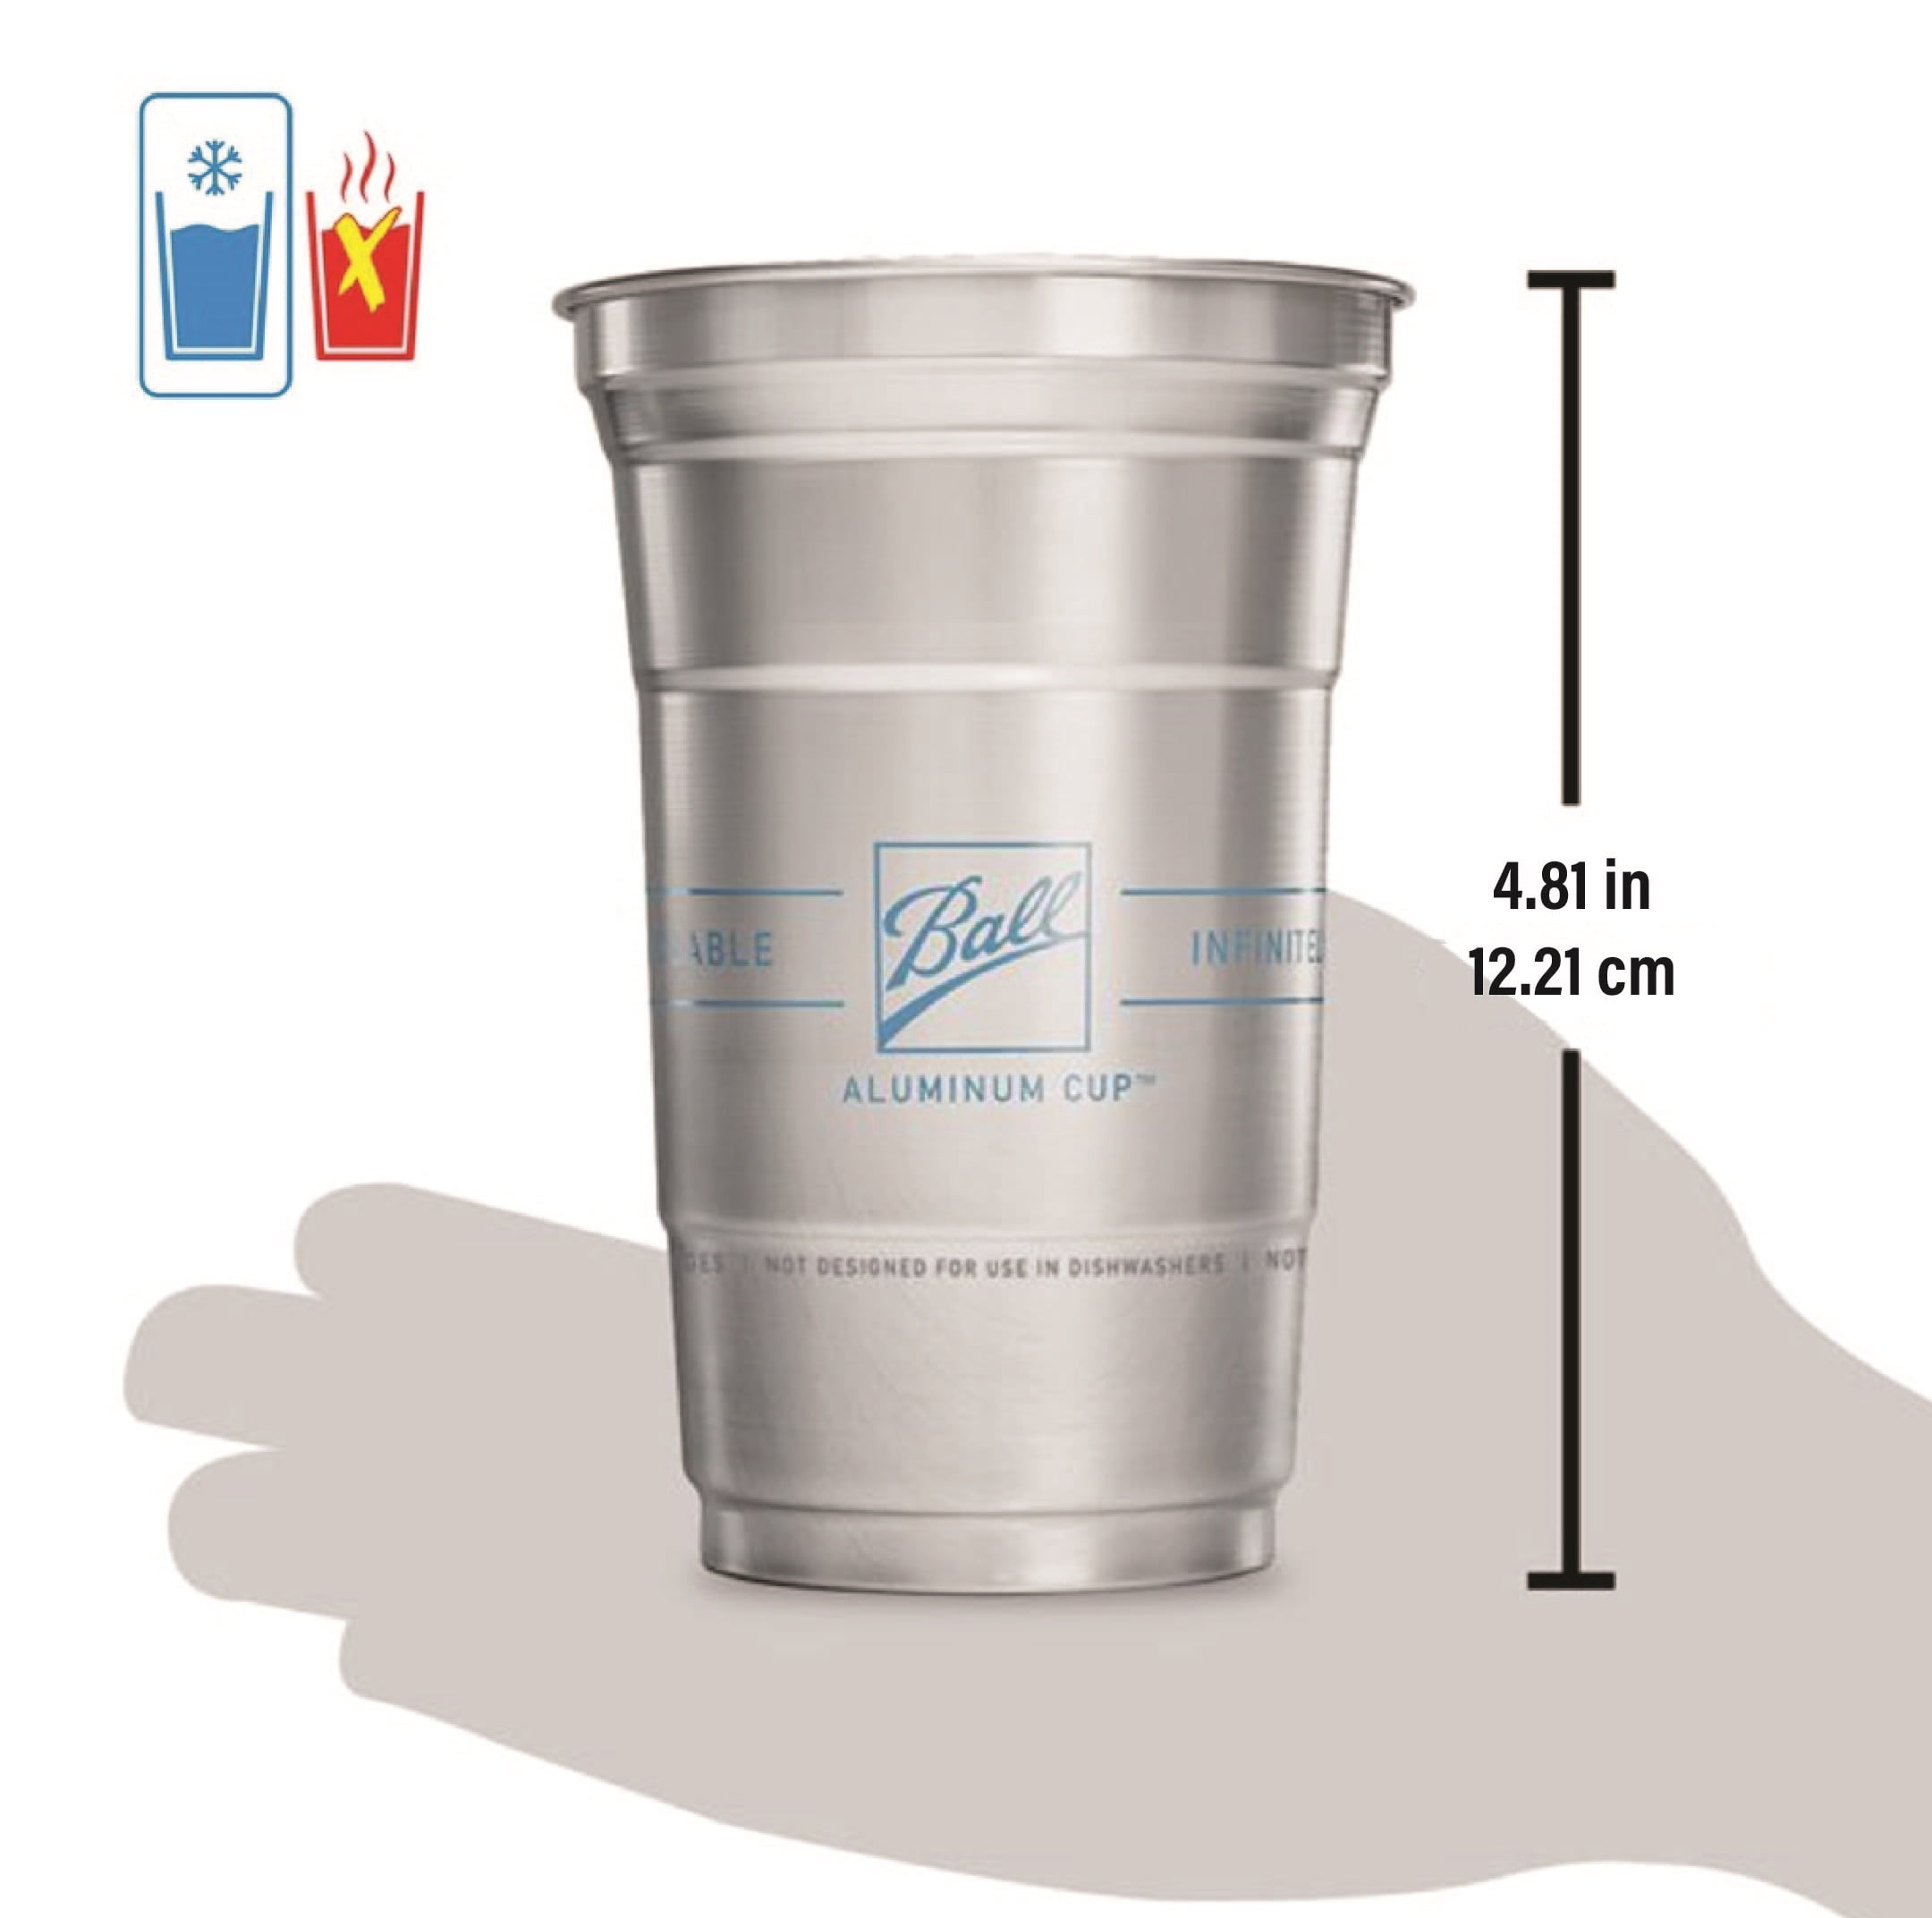 Ball Aluminum Cup Recyclable Party Cups, 20 oz. Cup, 30 Cups Per